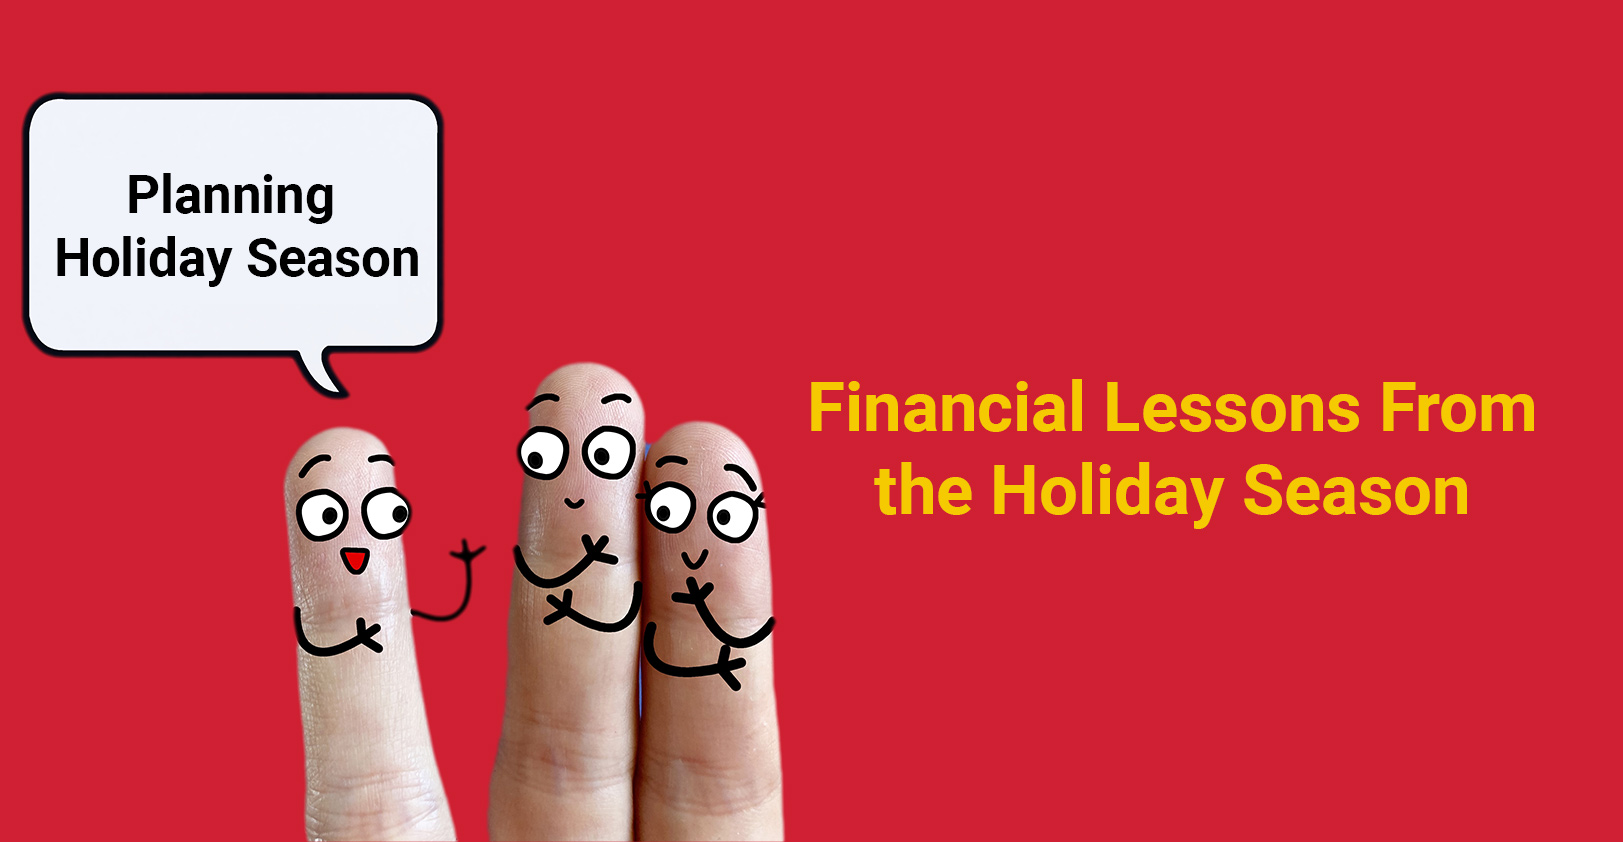 Financial Lessons To Learn From the Holiday Season